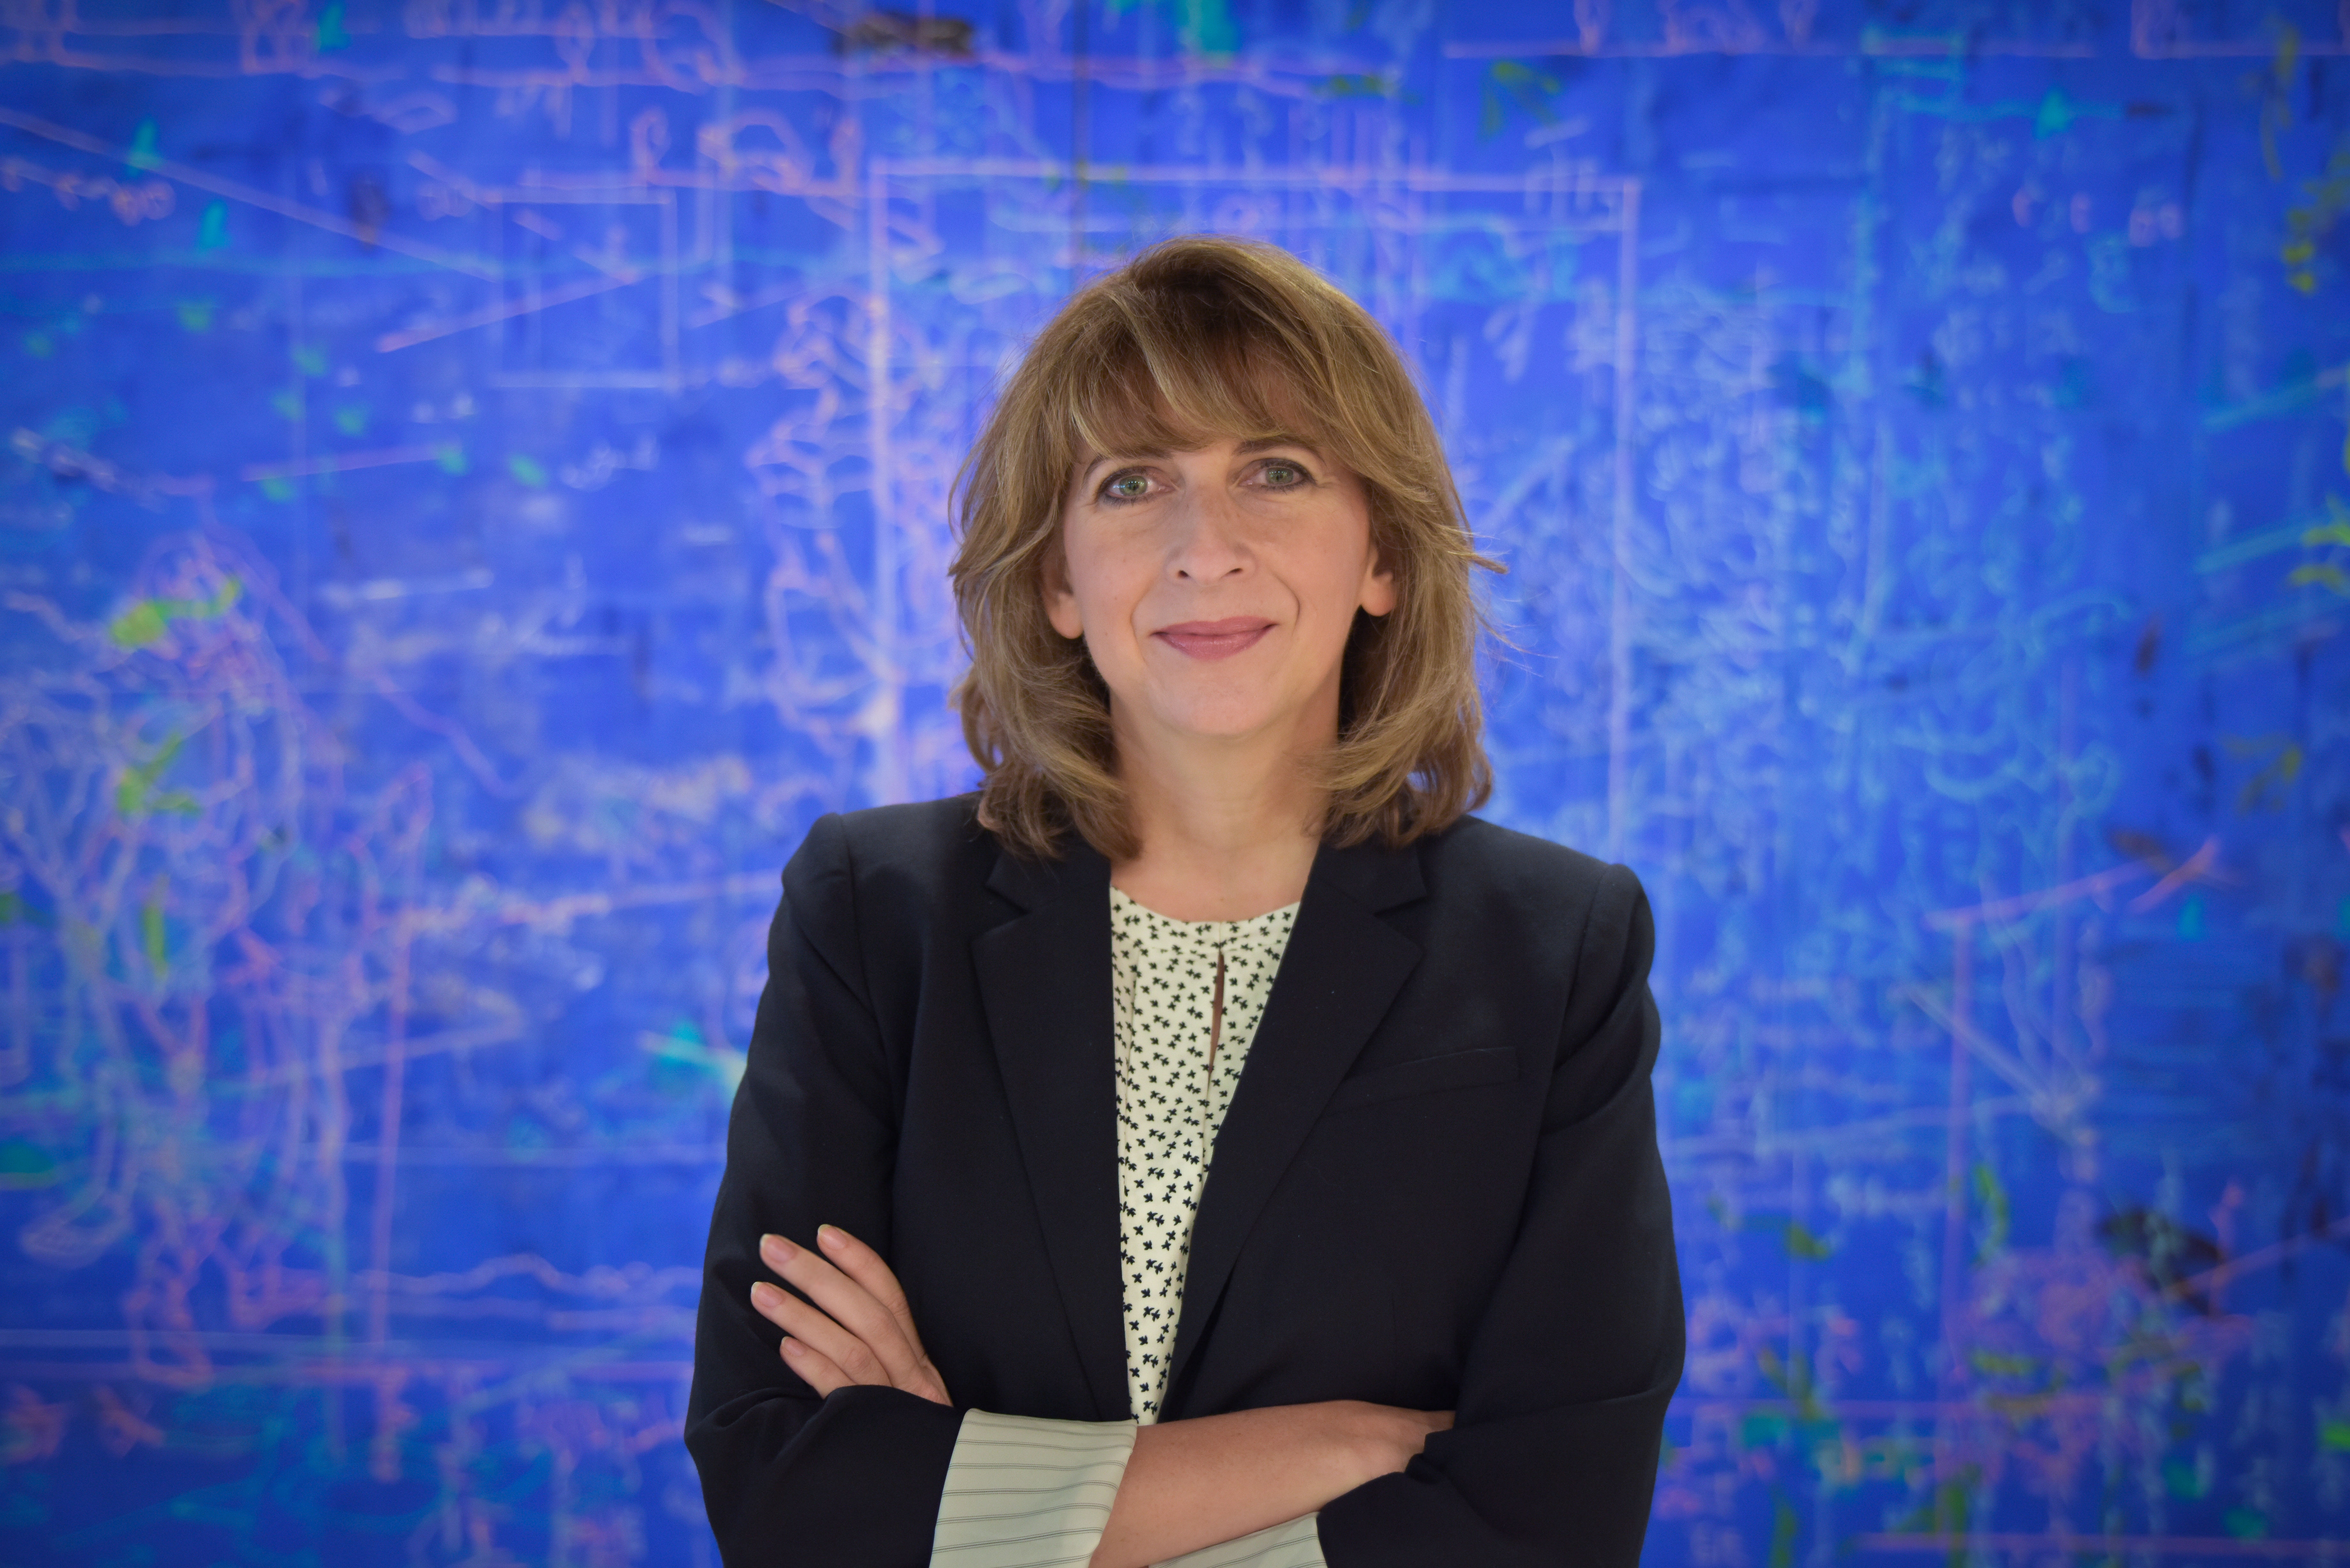 Leanne Young, CEO and executive director of The University of Texas at Dallas’ Brain Performance Institute, poses in front of a blue backdrop with her arms crossed.